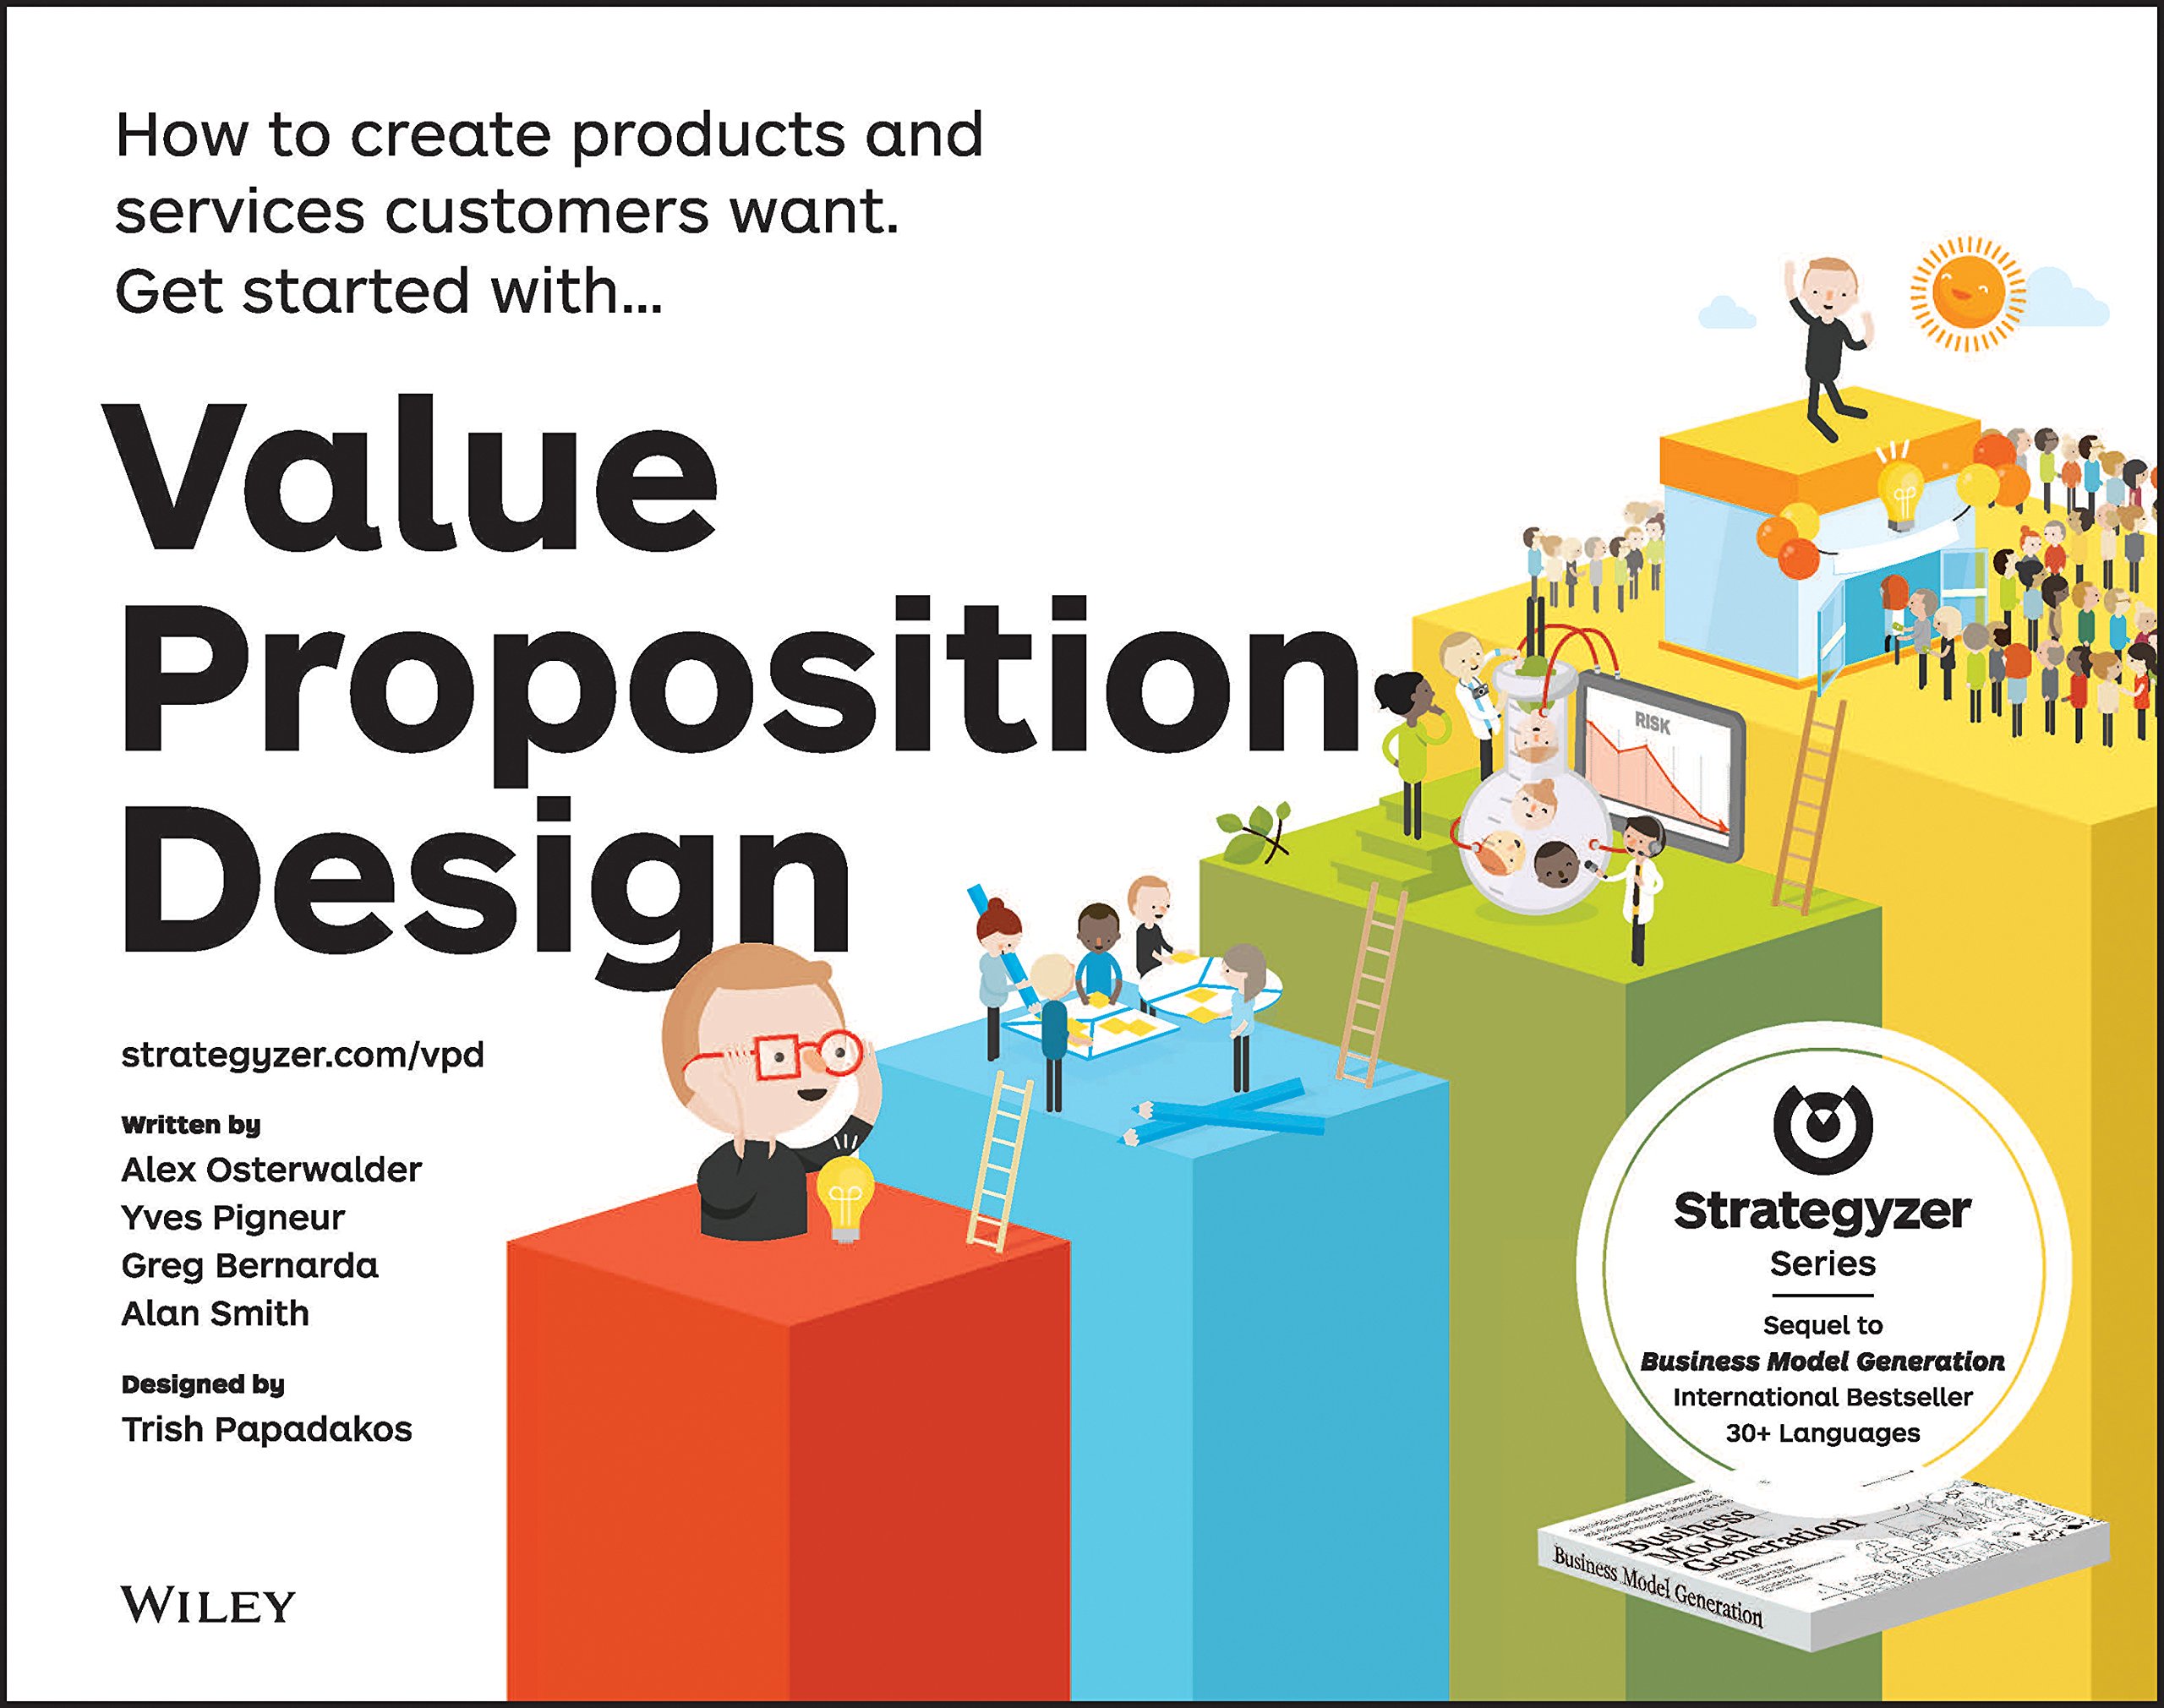 Value Proposition Design: How to Create Products and Services Customers Want.